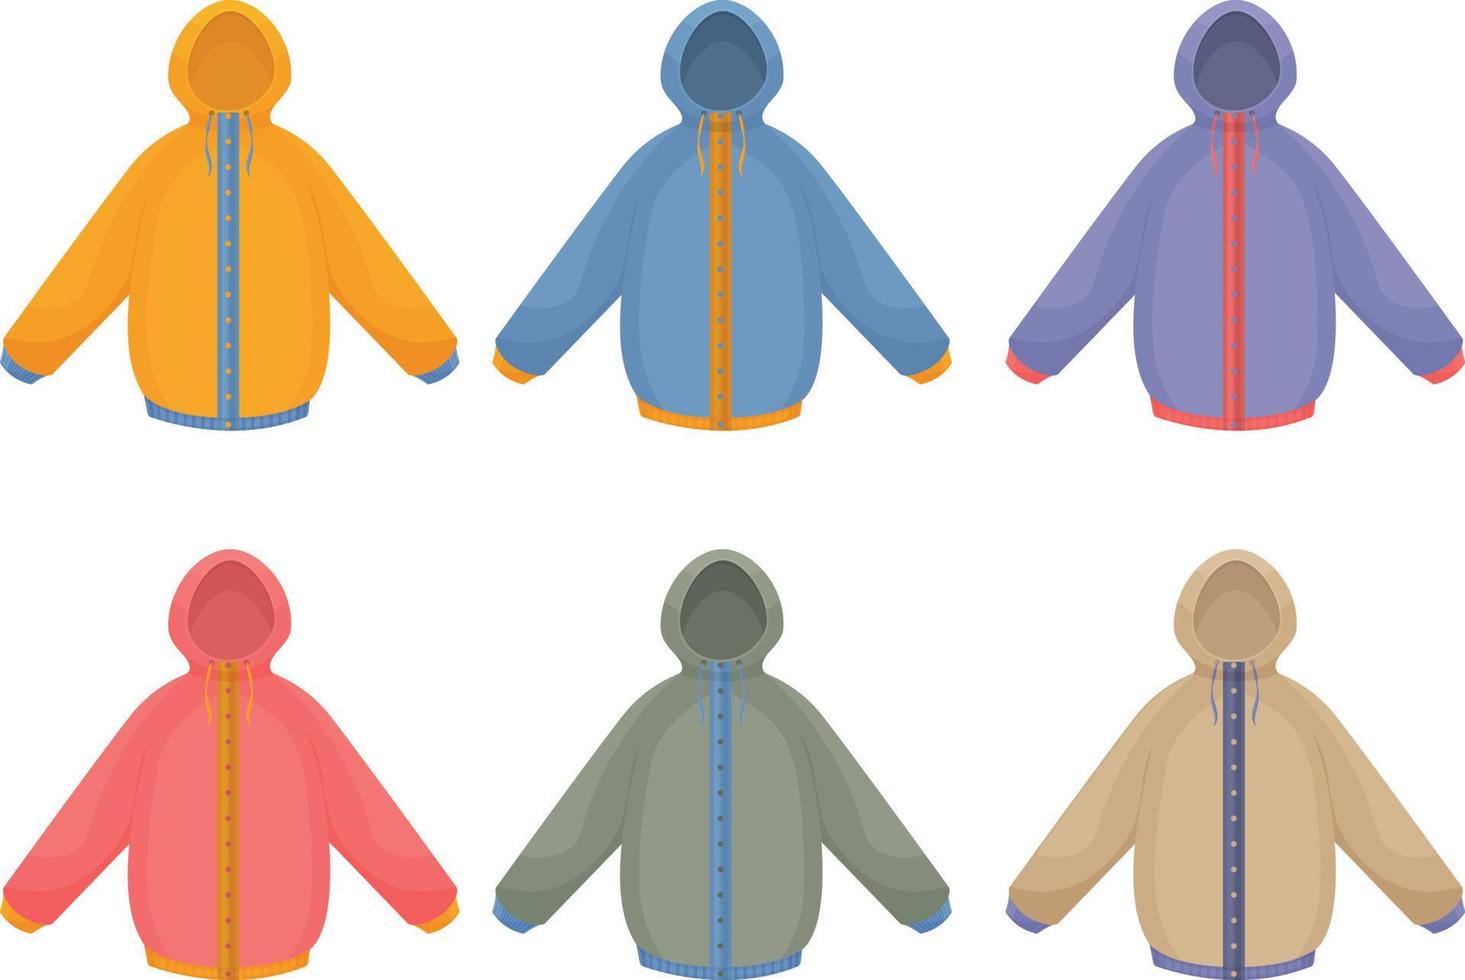 A large set with the image of warm autumn jackets of different colors and styles. Insulated jackets for walking and playing sports in cold weather. Winter jackets. Vector illustration